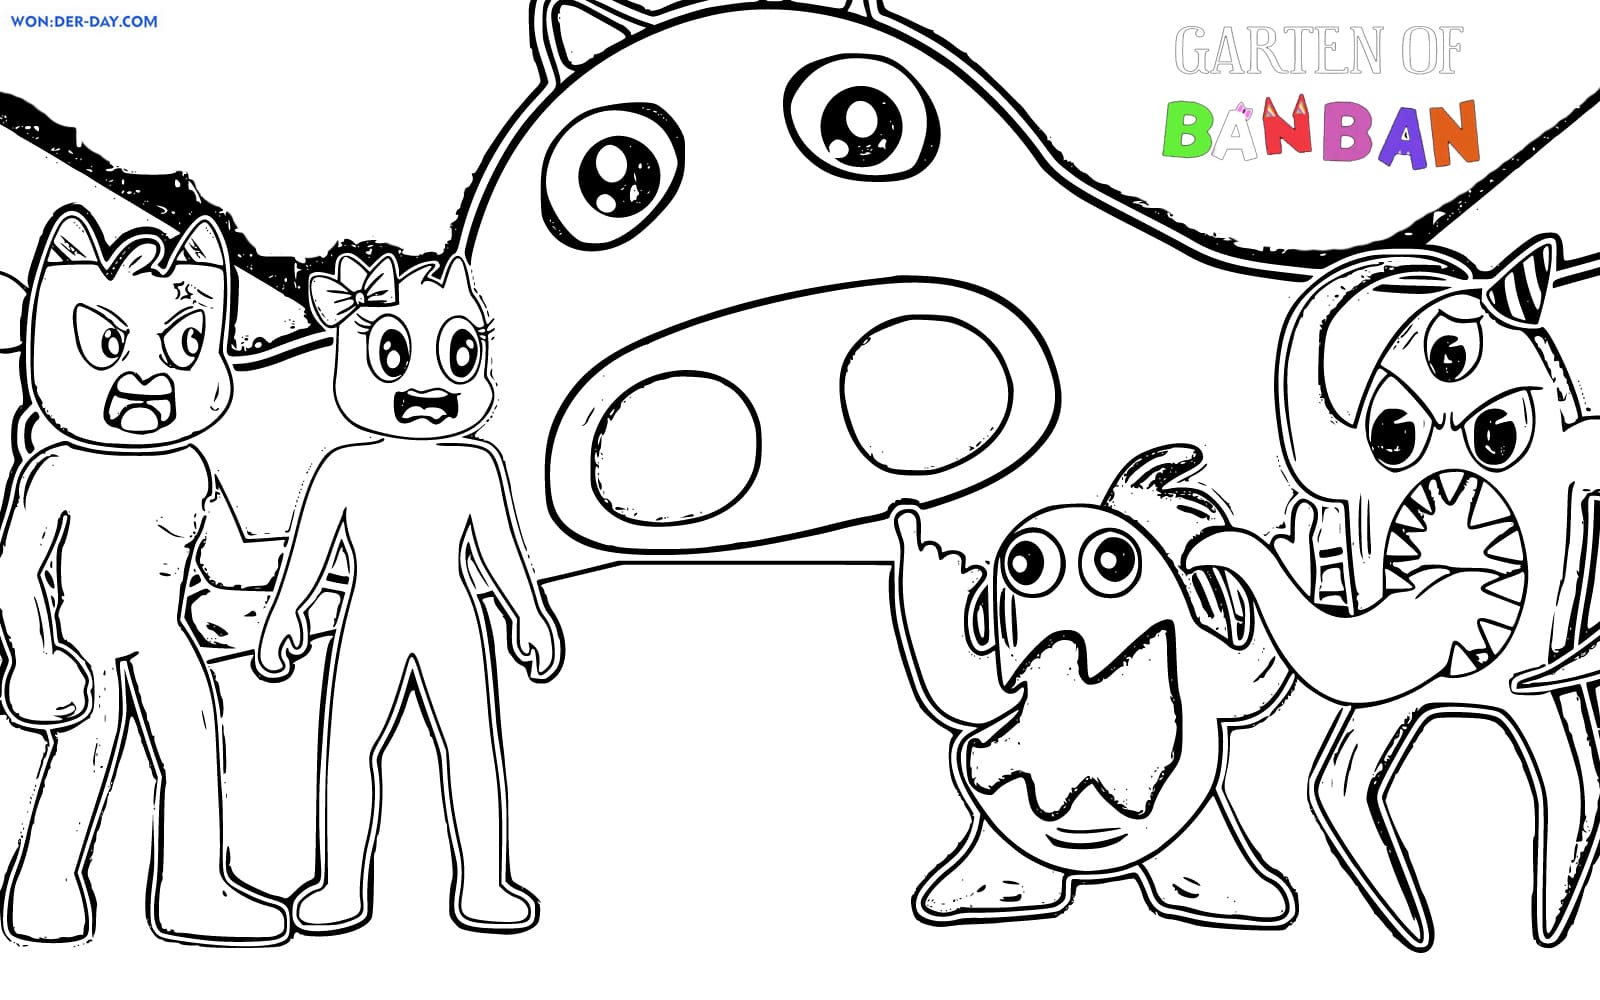 Garten of Banban Coloring Pages | WONDER DAY — Coloring pages for children  and adults